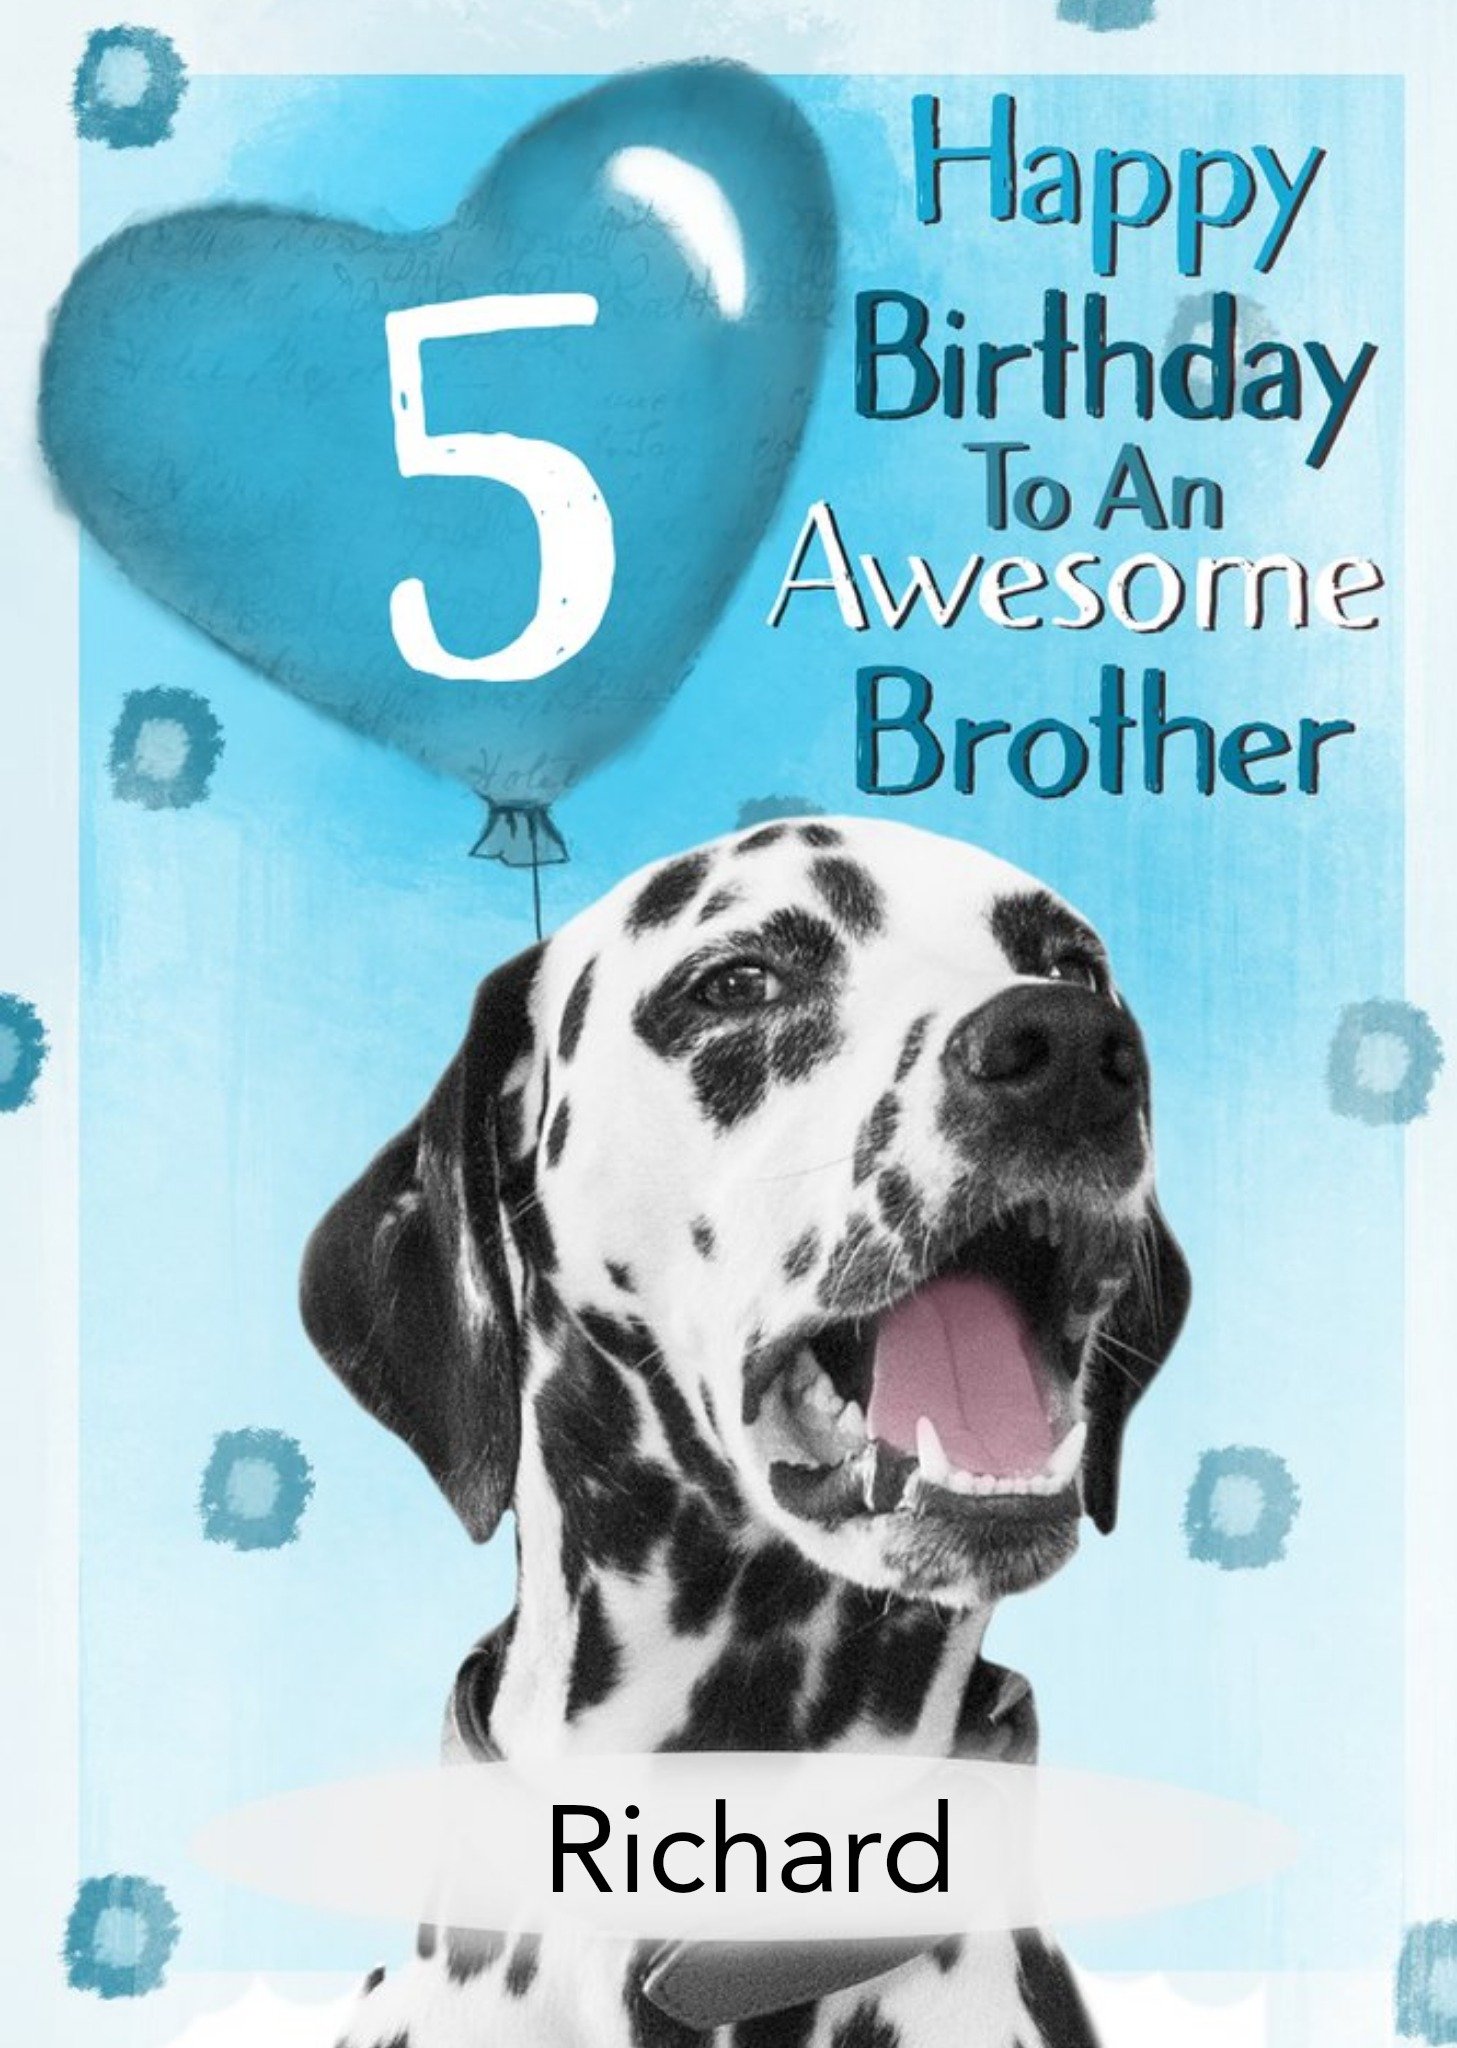 Moonpig Photo Of Dog With Birthday Balloon Brother 5th Birthday Card, Large